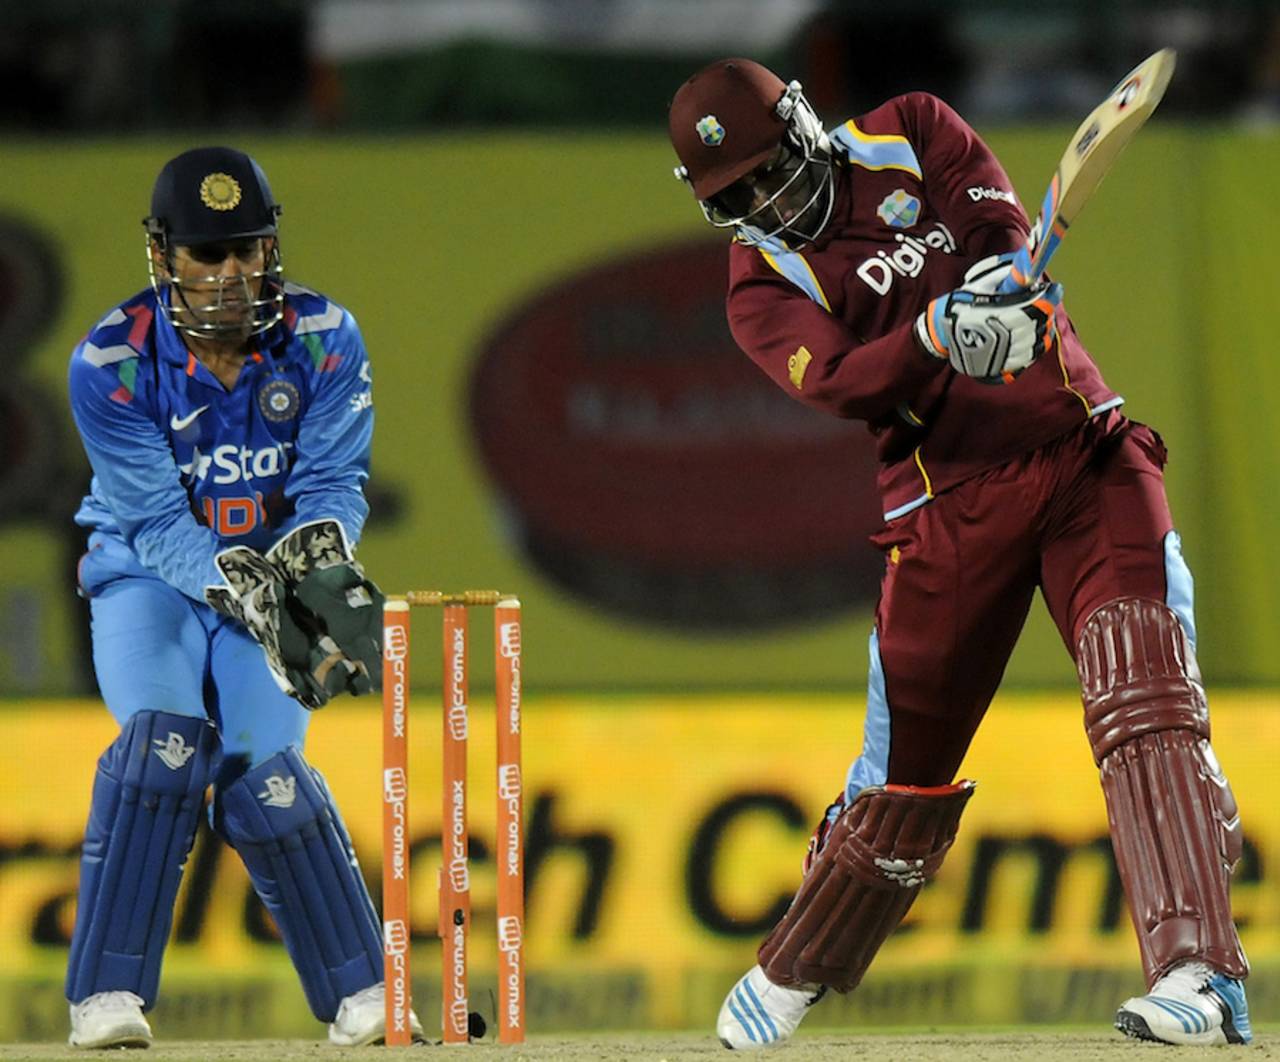 There is a possibility of the West Indies team touring India in 2017 for limited-overs matches&nbsp;&nbsp;&bull;&nbsp;&nbsp;BCCI